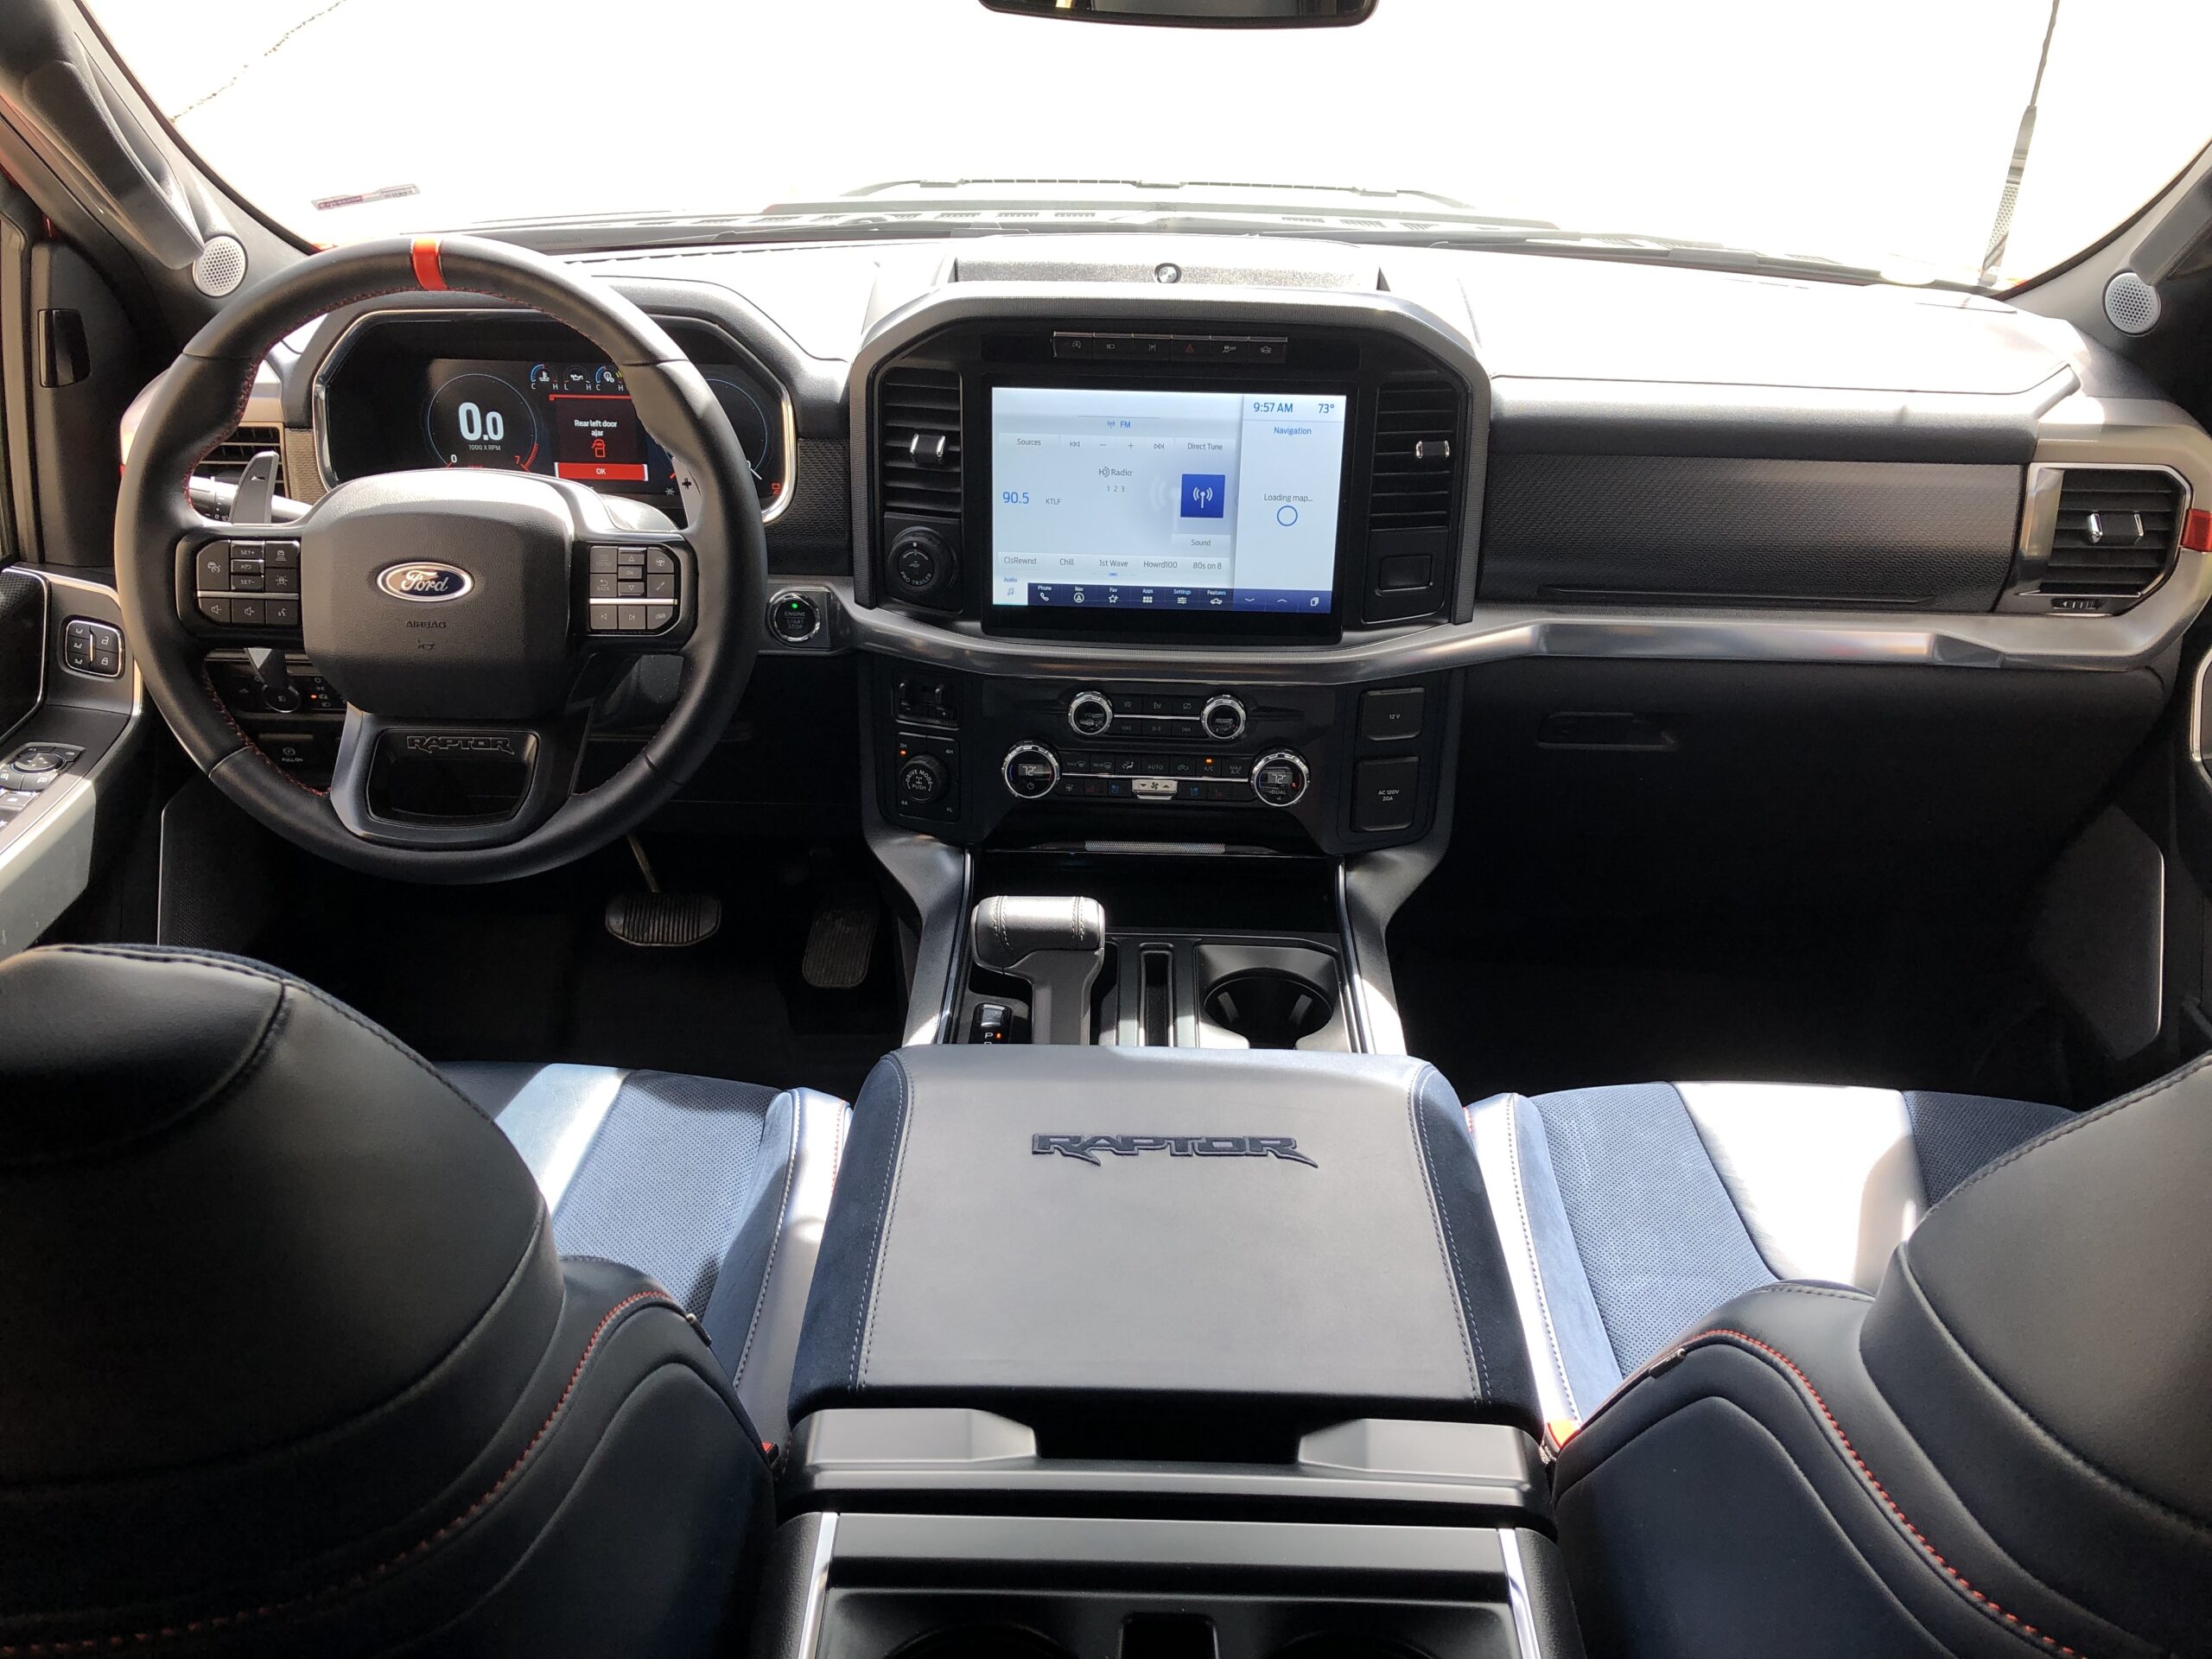 An inside look at the F-150 Raptor.